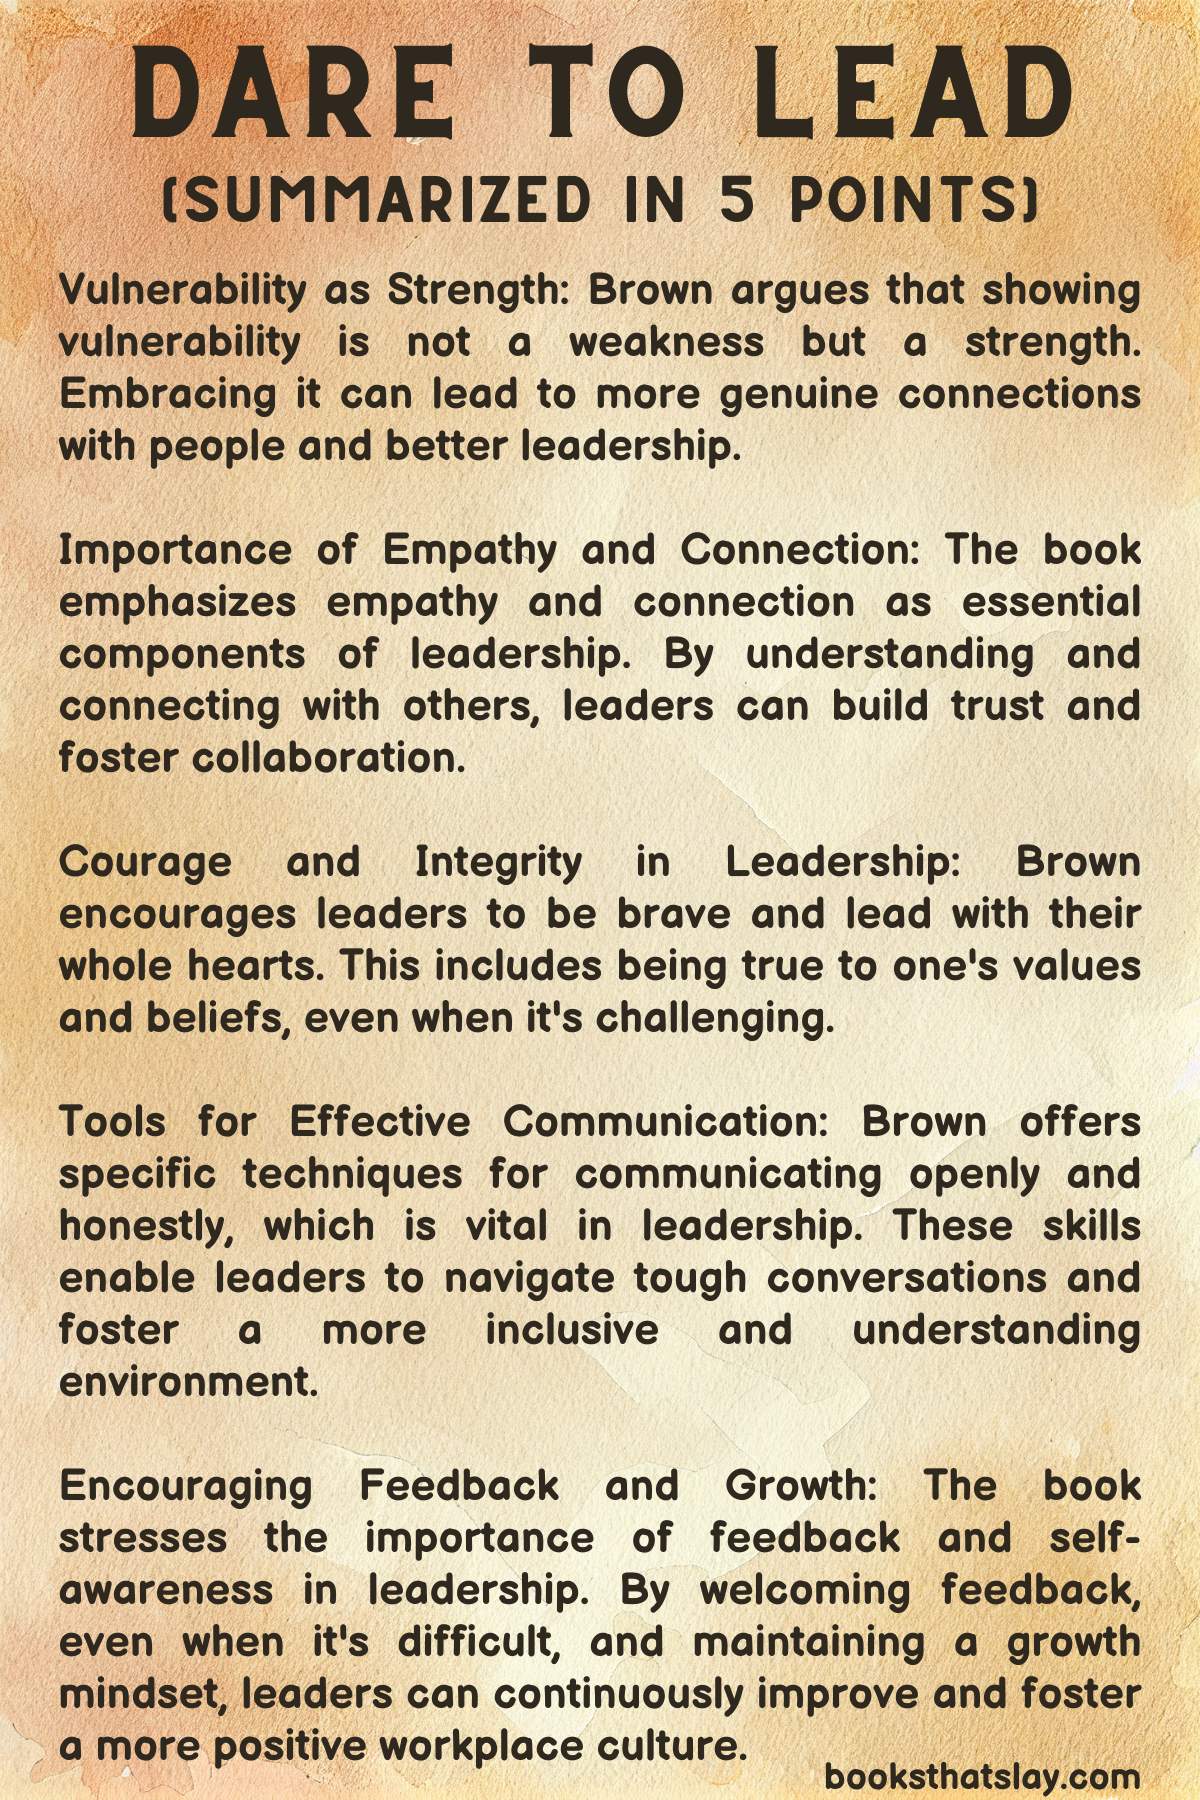 Dare to Lead Summary and Key Lessons